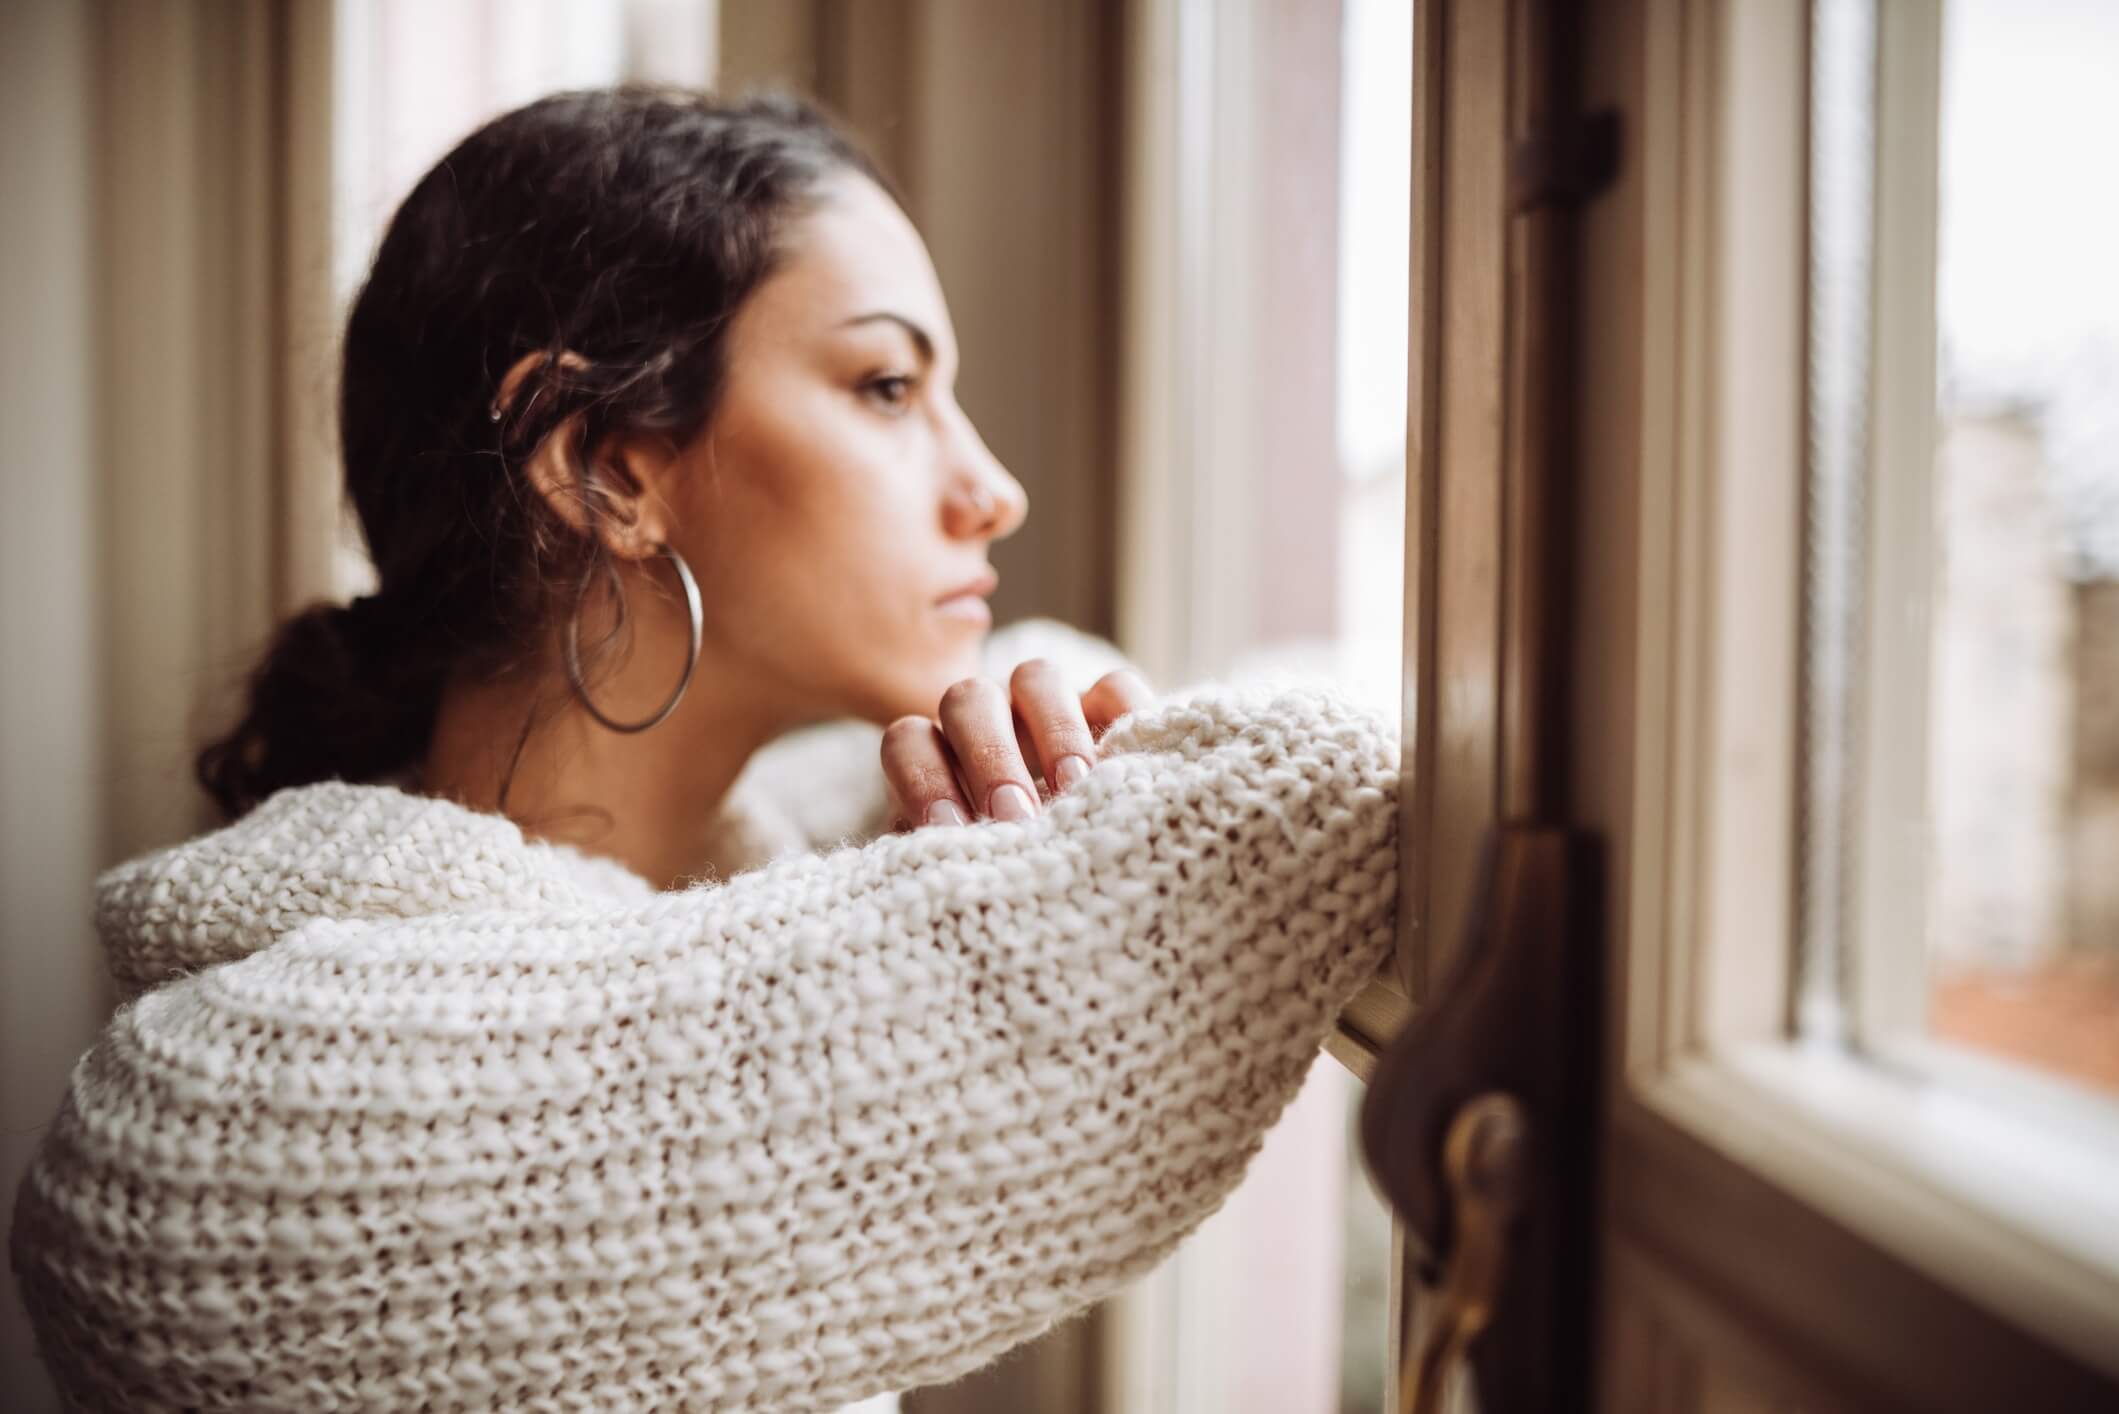 Woman stares out the window struggling with adjusting to post-pandemic life